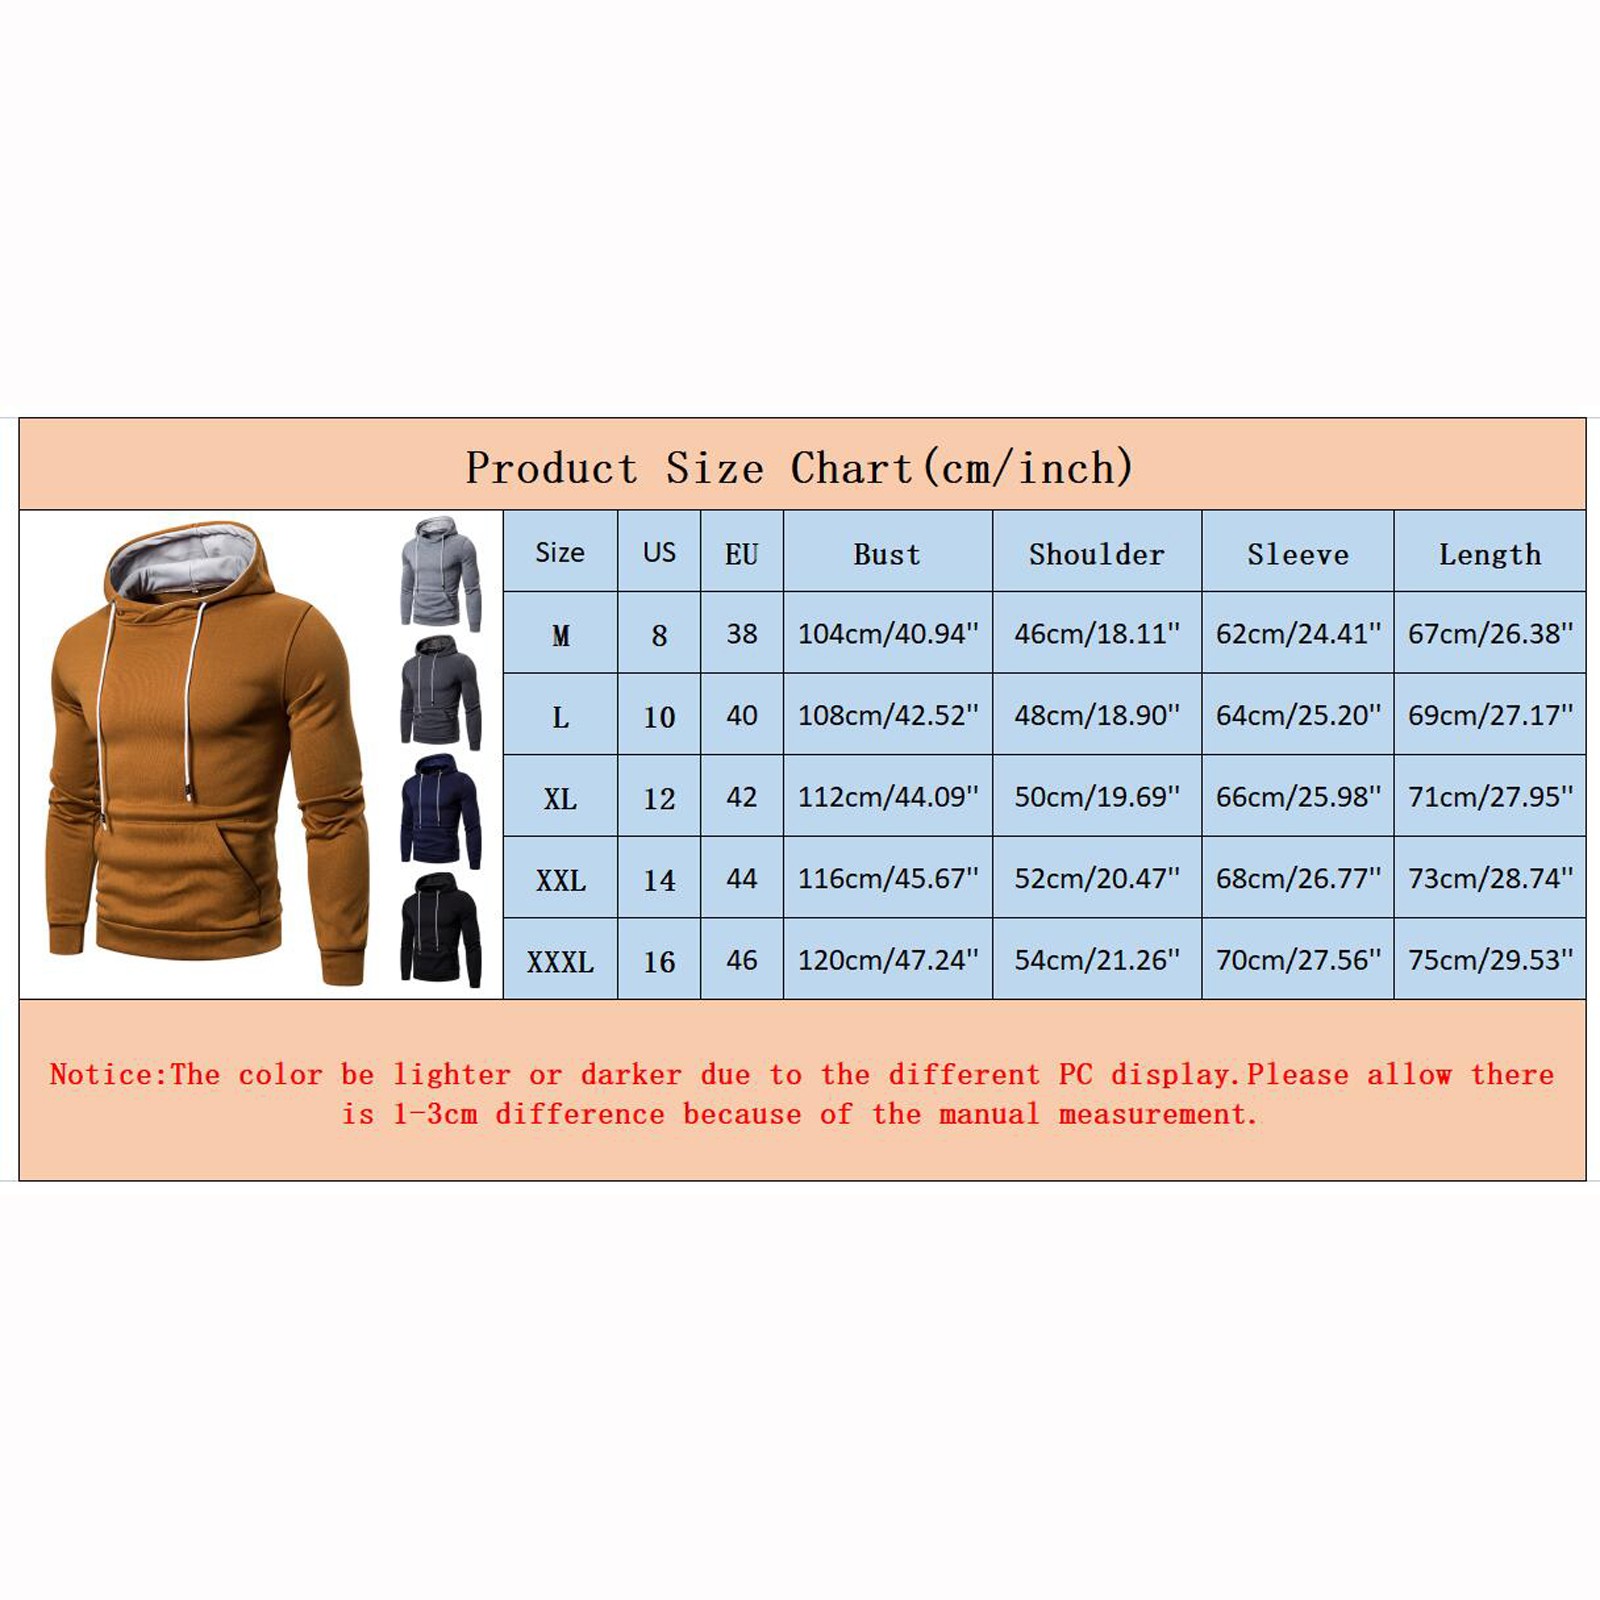 UIX Men's Sweater Solid Color Loose Large Size Hooded Sweater Top ...